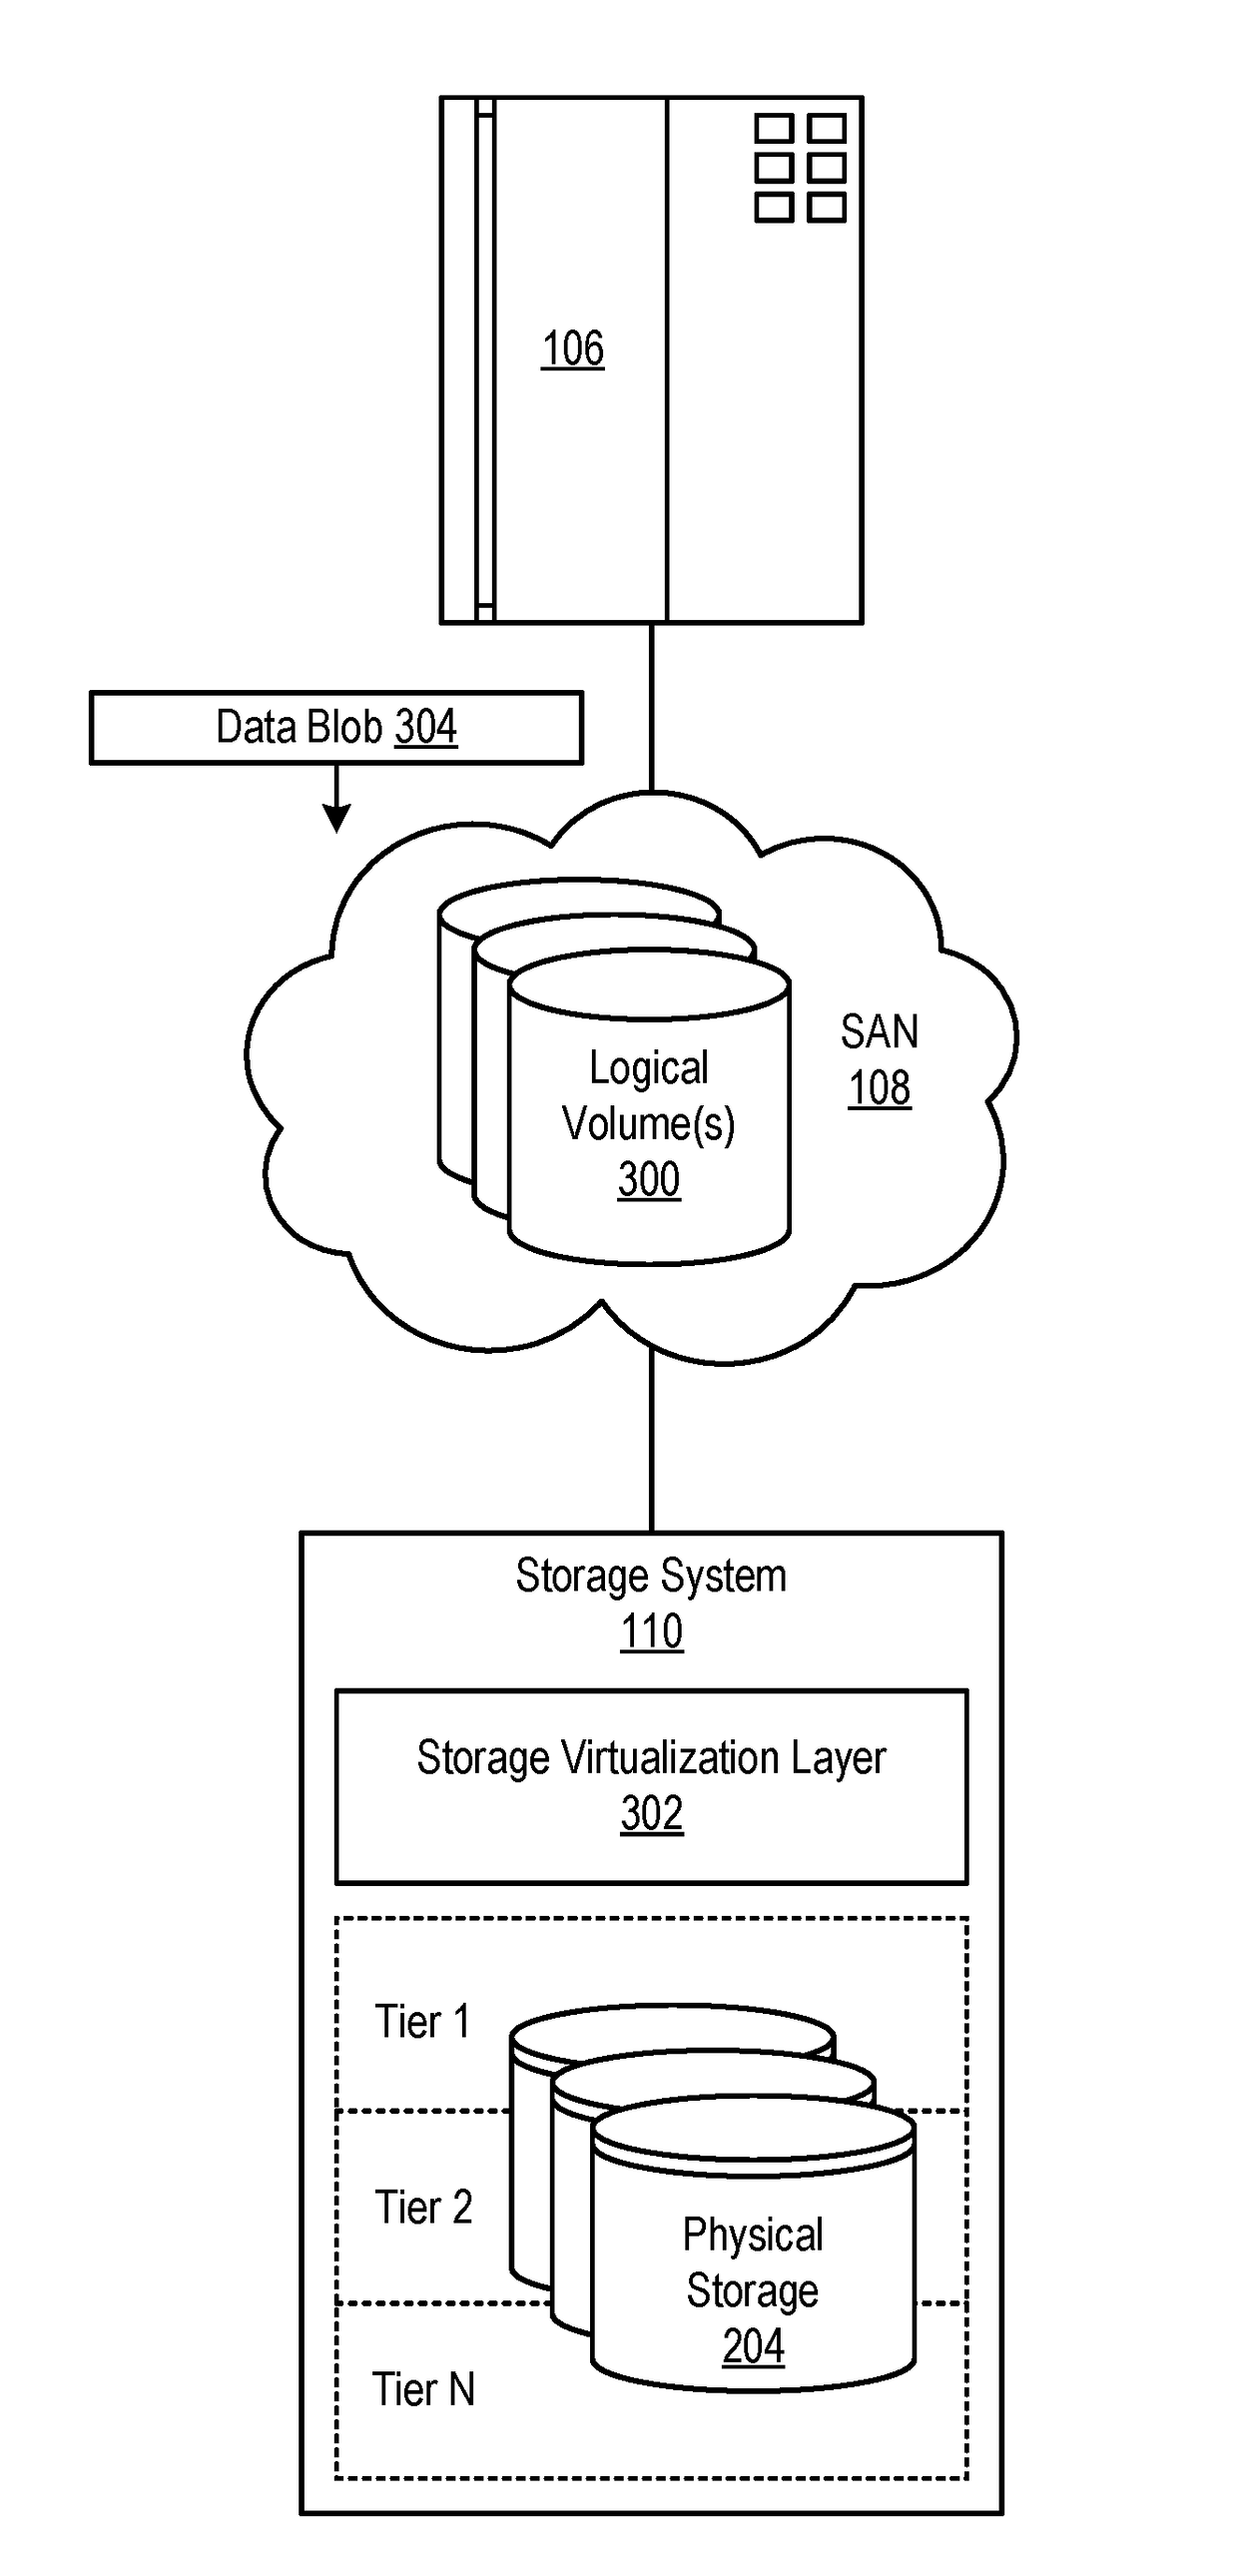 Selective compression of unstructured data